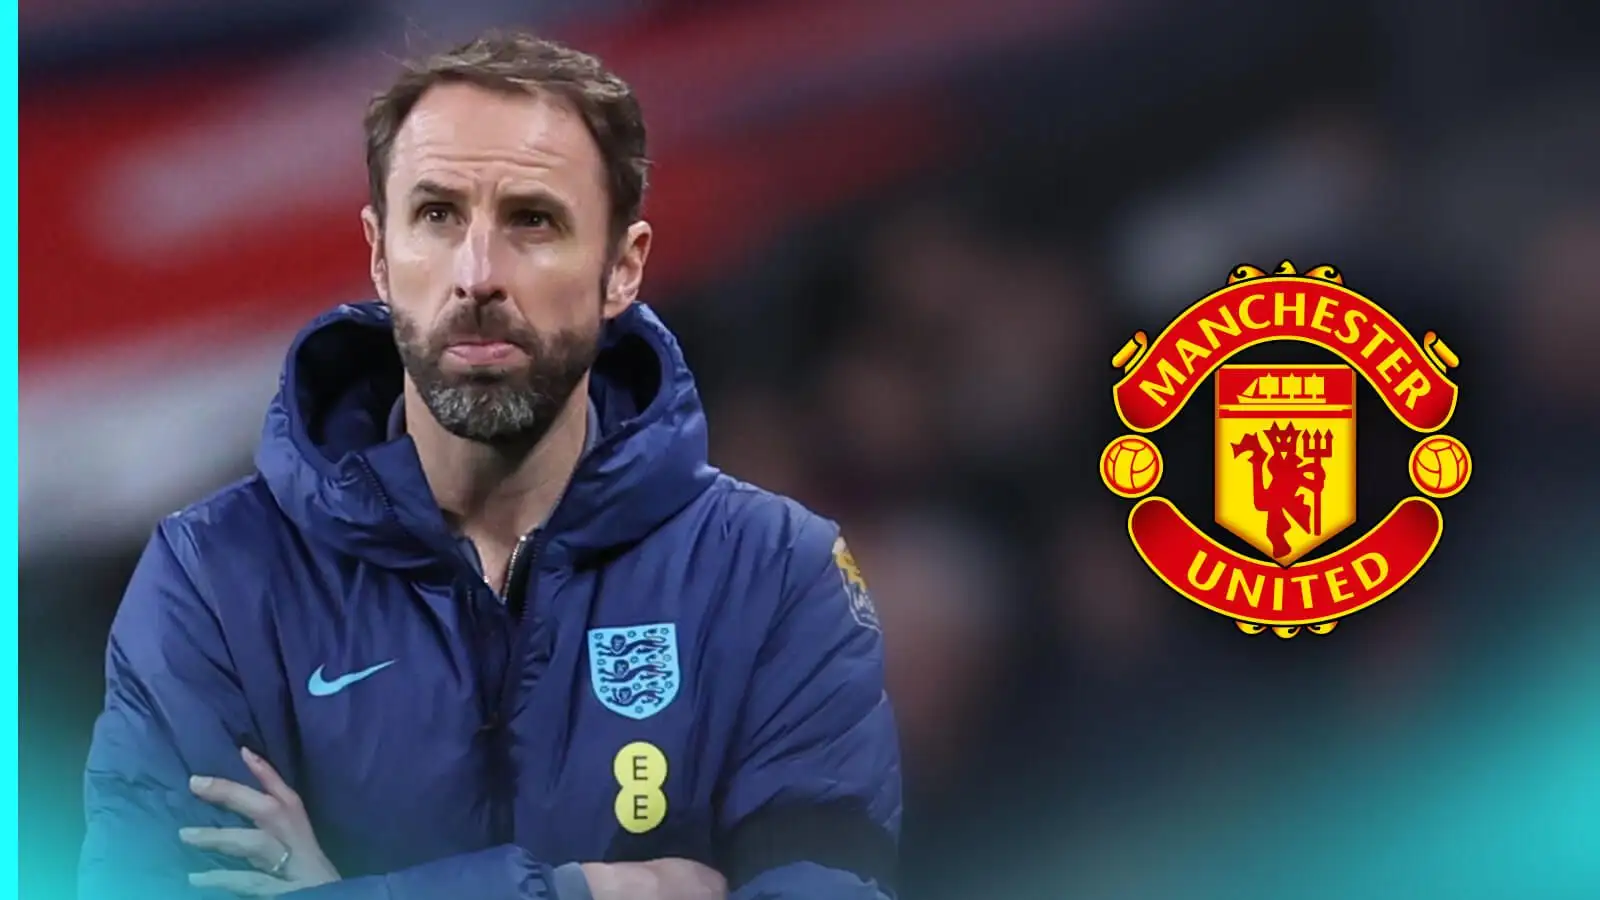 Gareth Southgate to Man Utd ruled out as report insists alternative manager is the ‘leading contender’